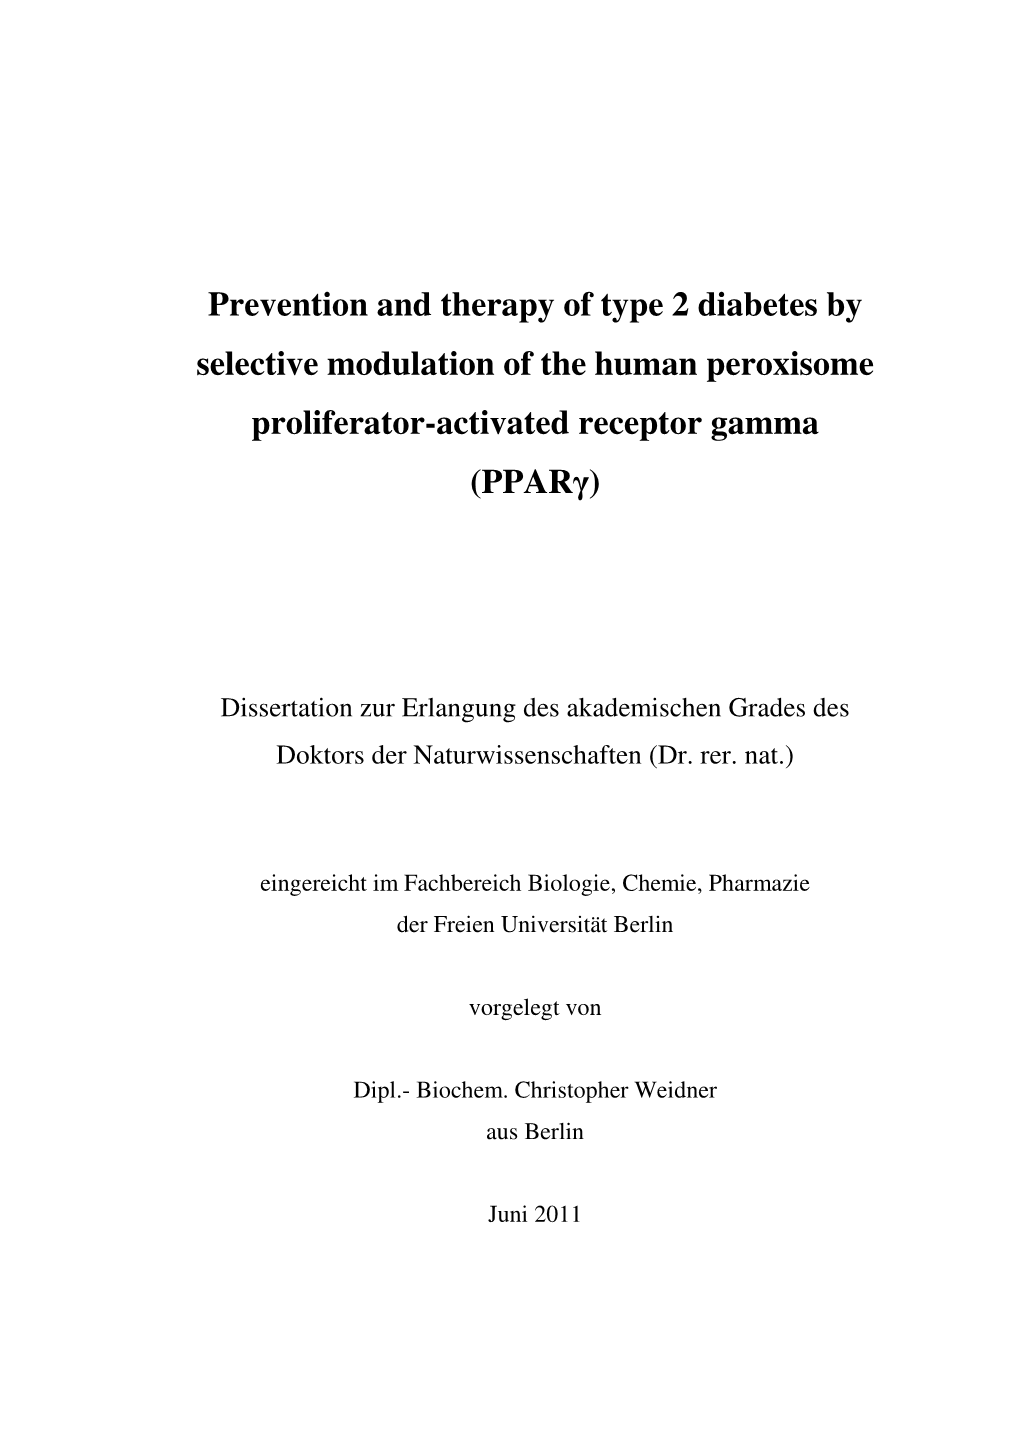 Prevention and Therapy of Type 2 Diabetes by Selective Modulation of the Human Peroxisome Proliferator-Activated Receptor Gamma (Pparγ)